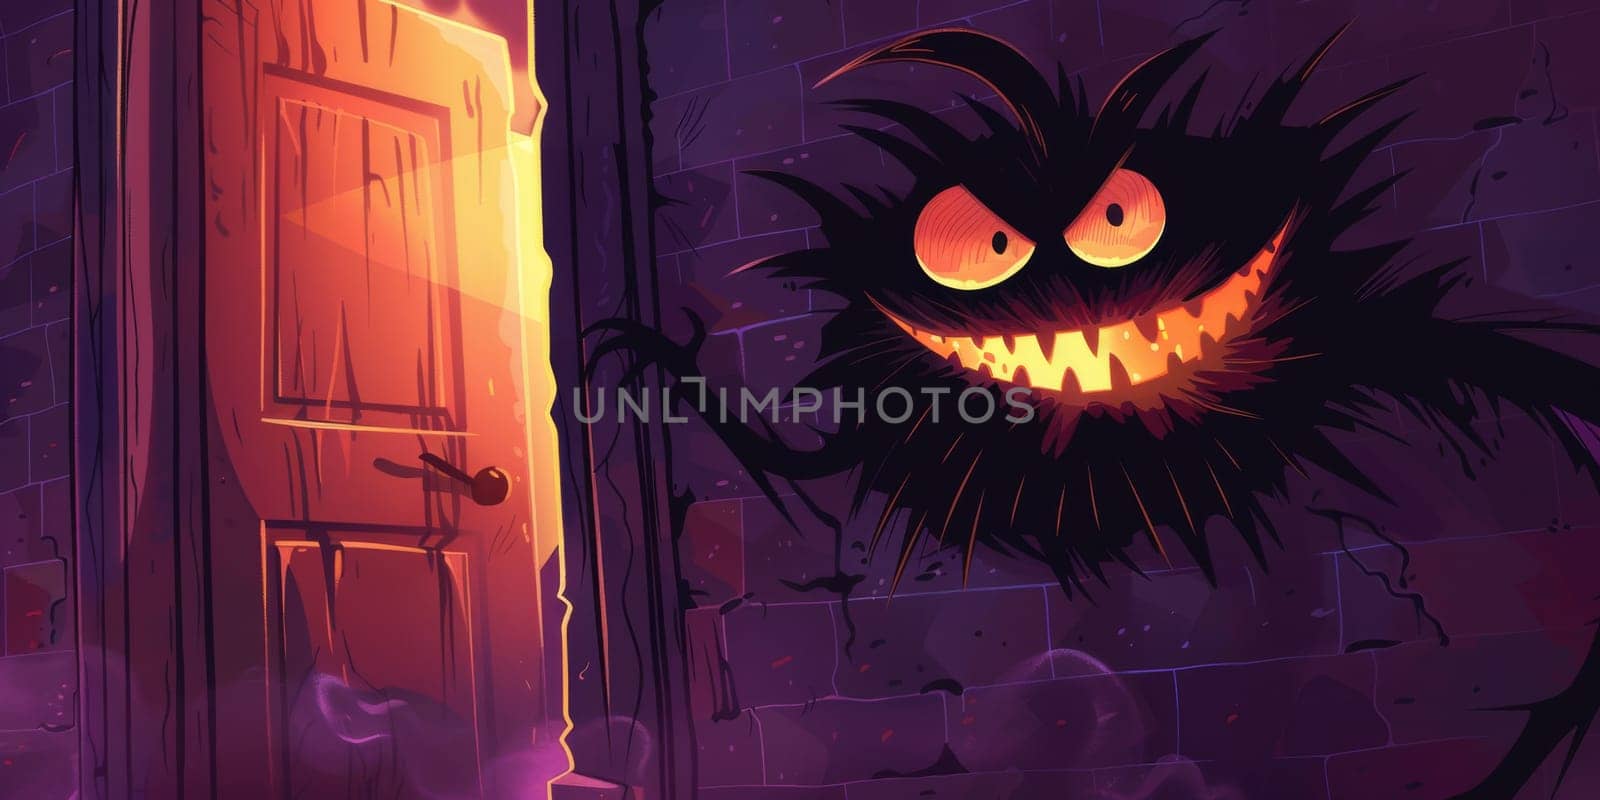 Fear of the dark behind the door, a monster and abstract creature